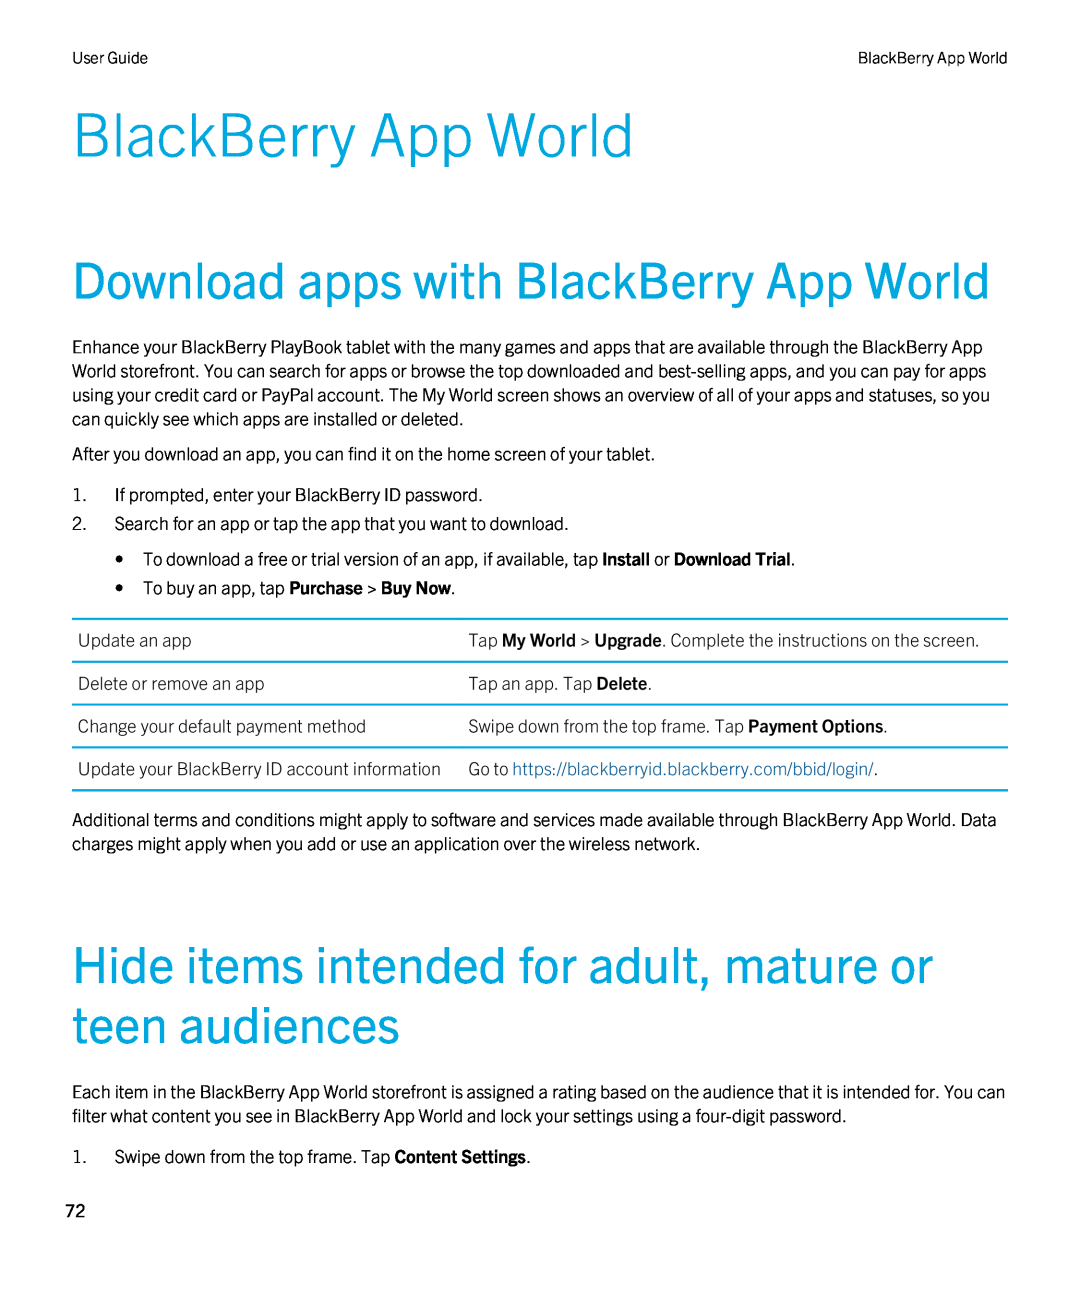 Blackberry 2.0.1 Download apps with BlackBerry App World, Hide items intended for adult, mature or teen audiences 